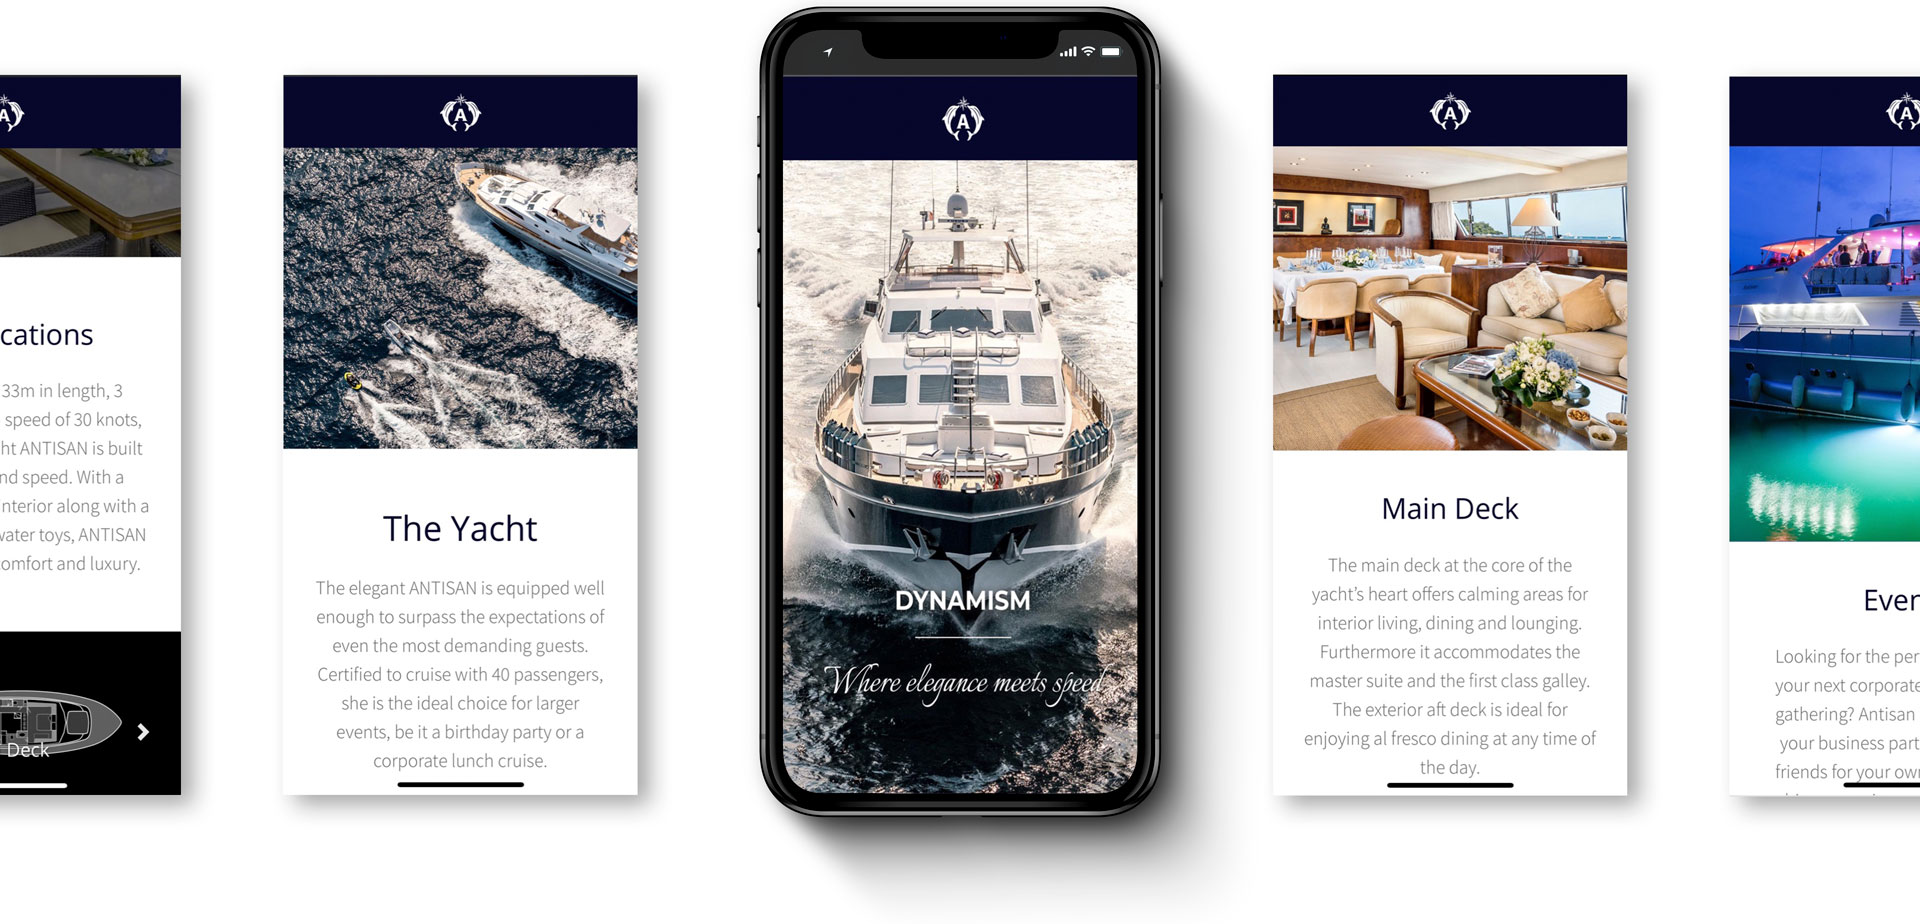 Antisan super yacht web design for mobile devices and tablets